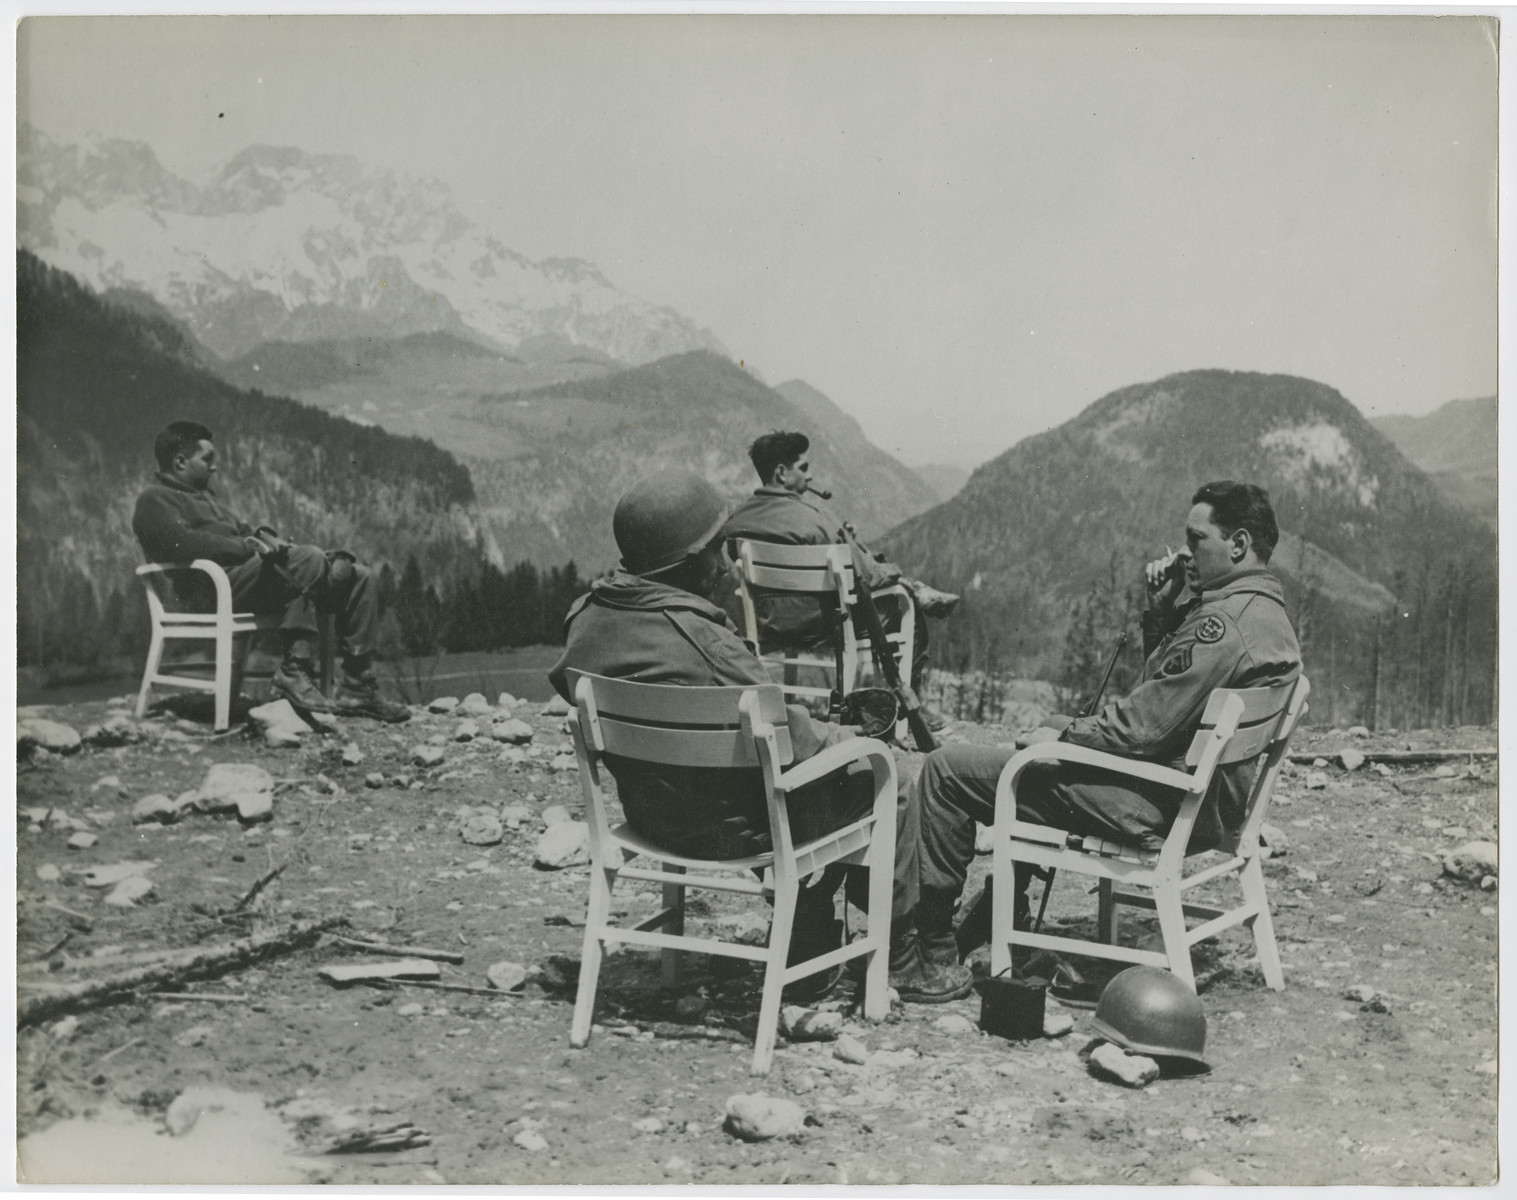 Five soliders of the Seventh U.S. Army visit the former mountain retreat of Adolf Hitler in the Berchtesgaden on the first day of peace in Europe.